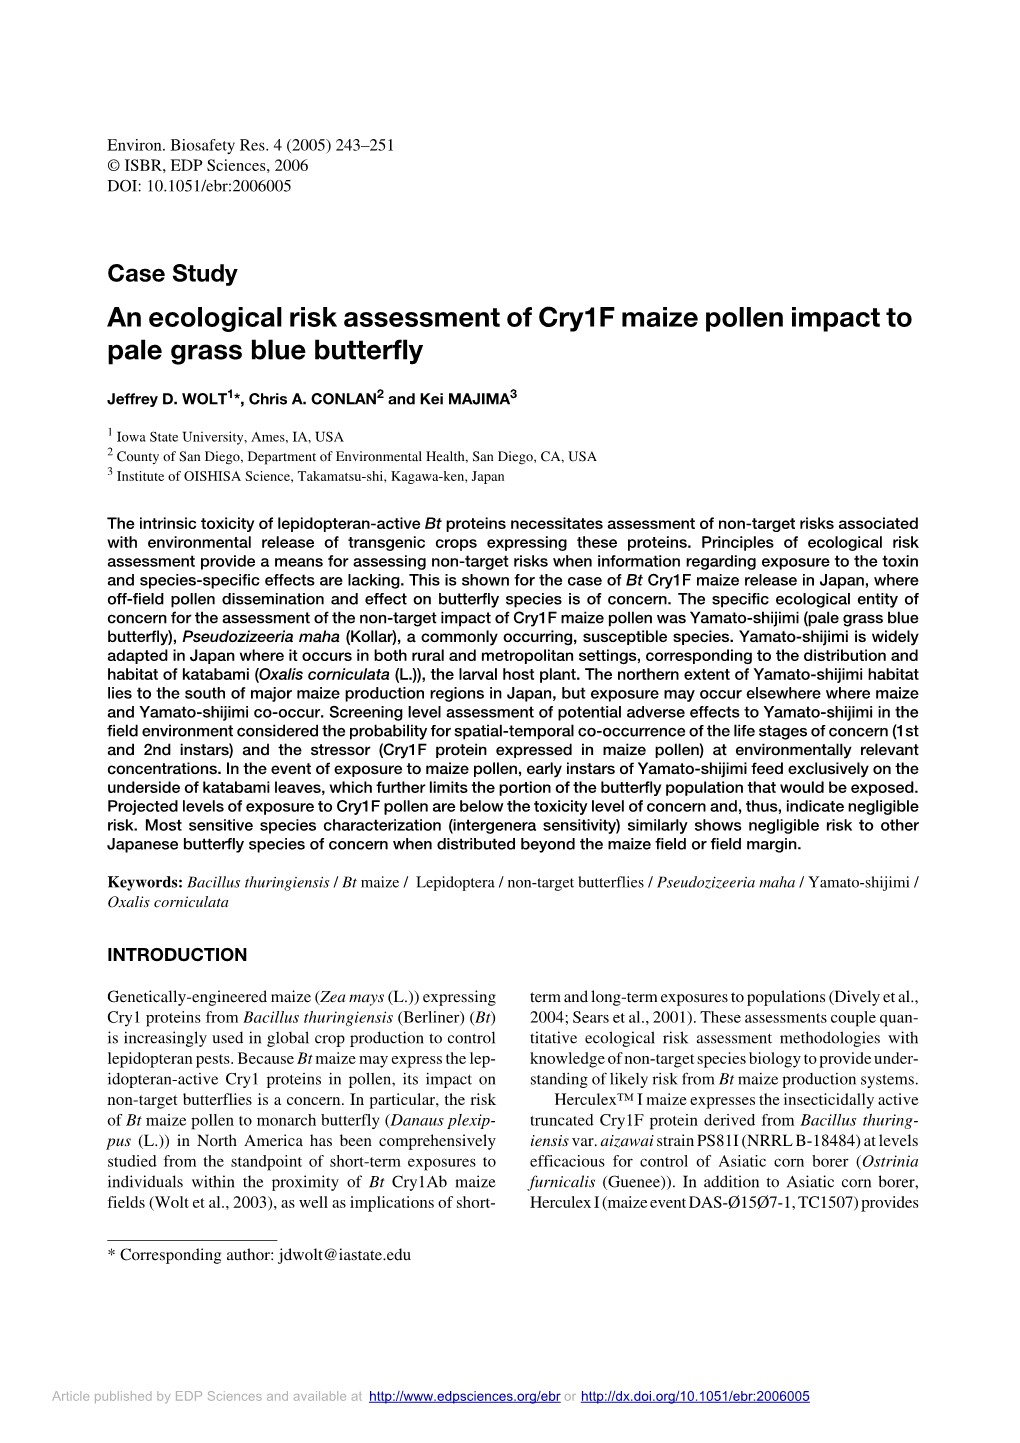 An Ecological Risk Assessment of Cry1f Maize Pollen Impact to Pale Grass Blue Butterfly